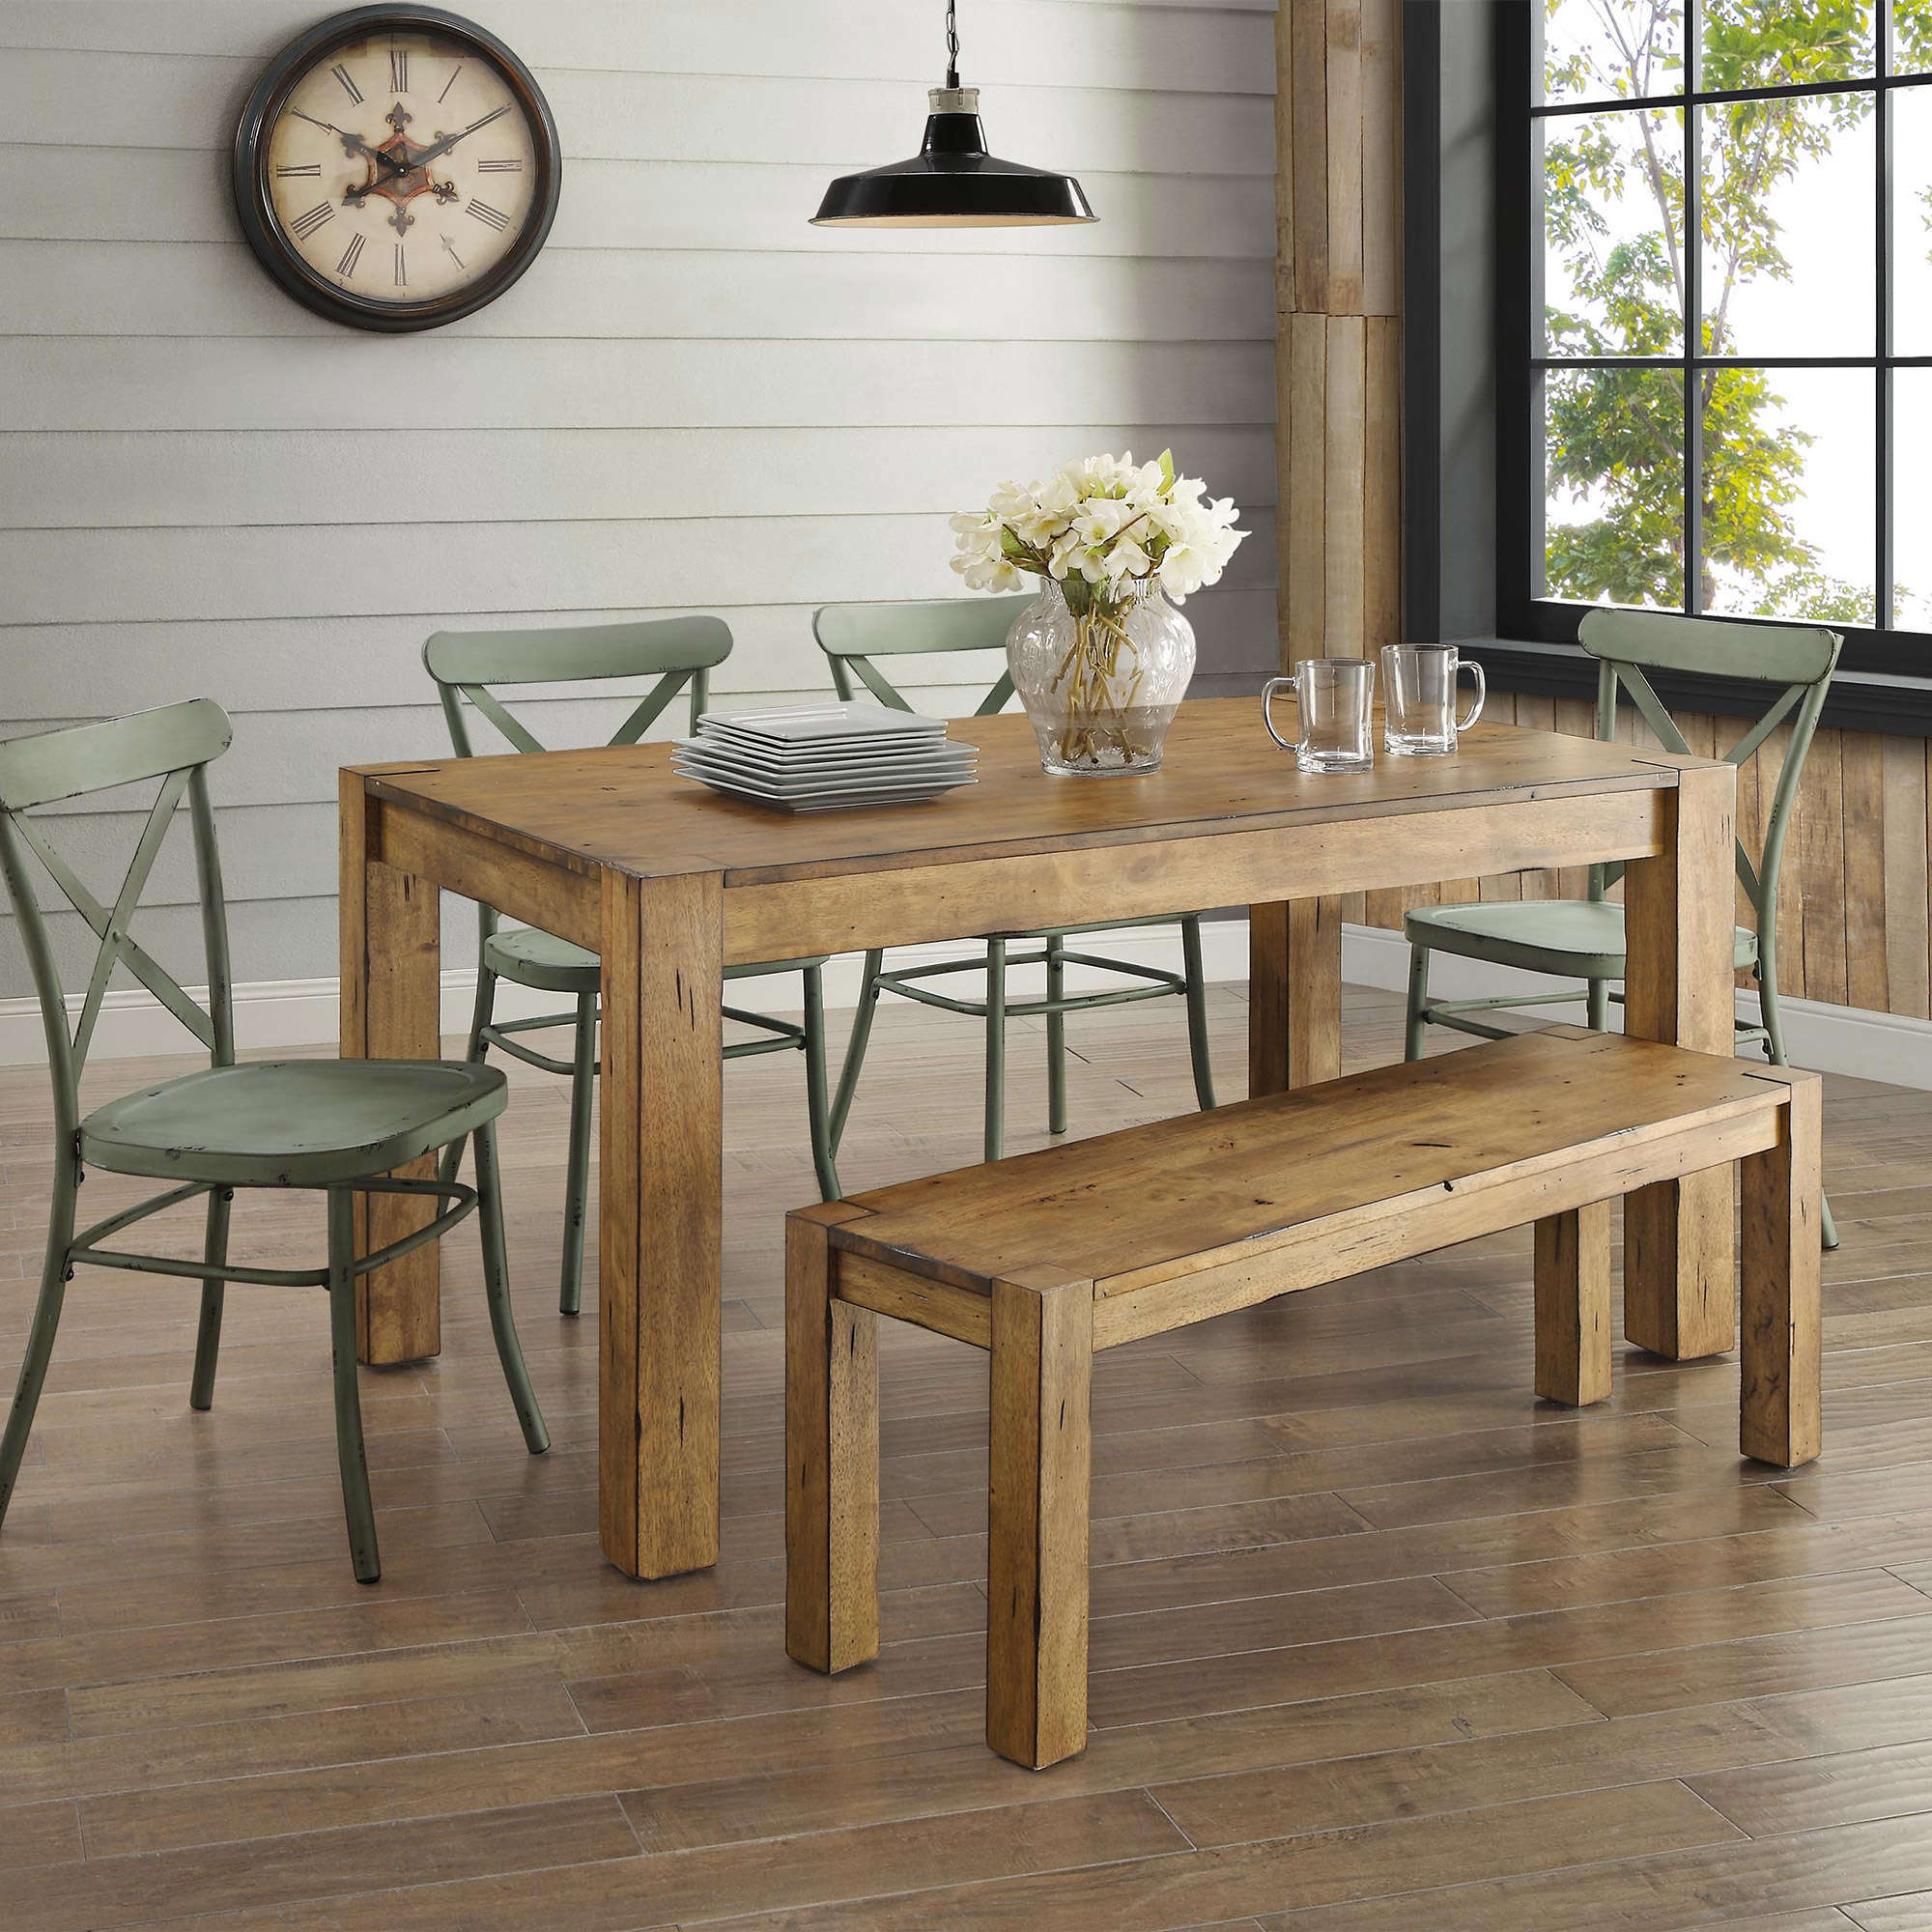 Better Homes & Gardens Bryant Solid Wood Dining Bench, Rustic Brown - image 4 of 8